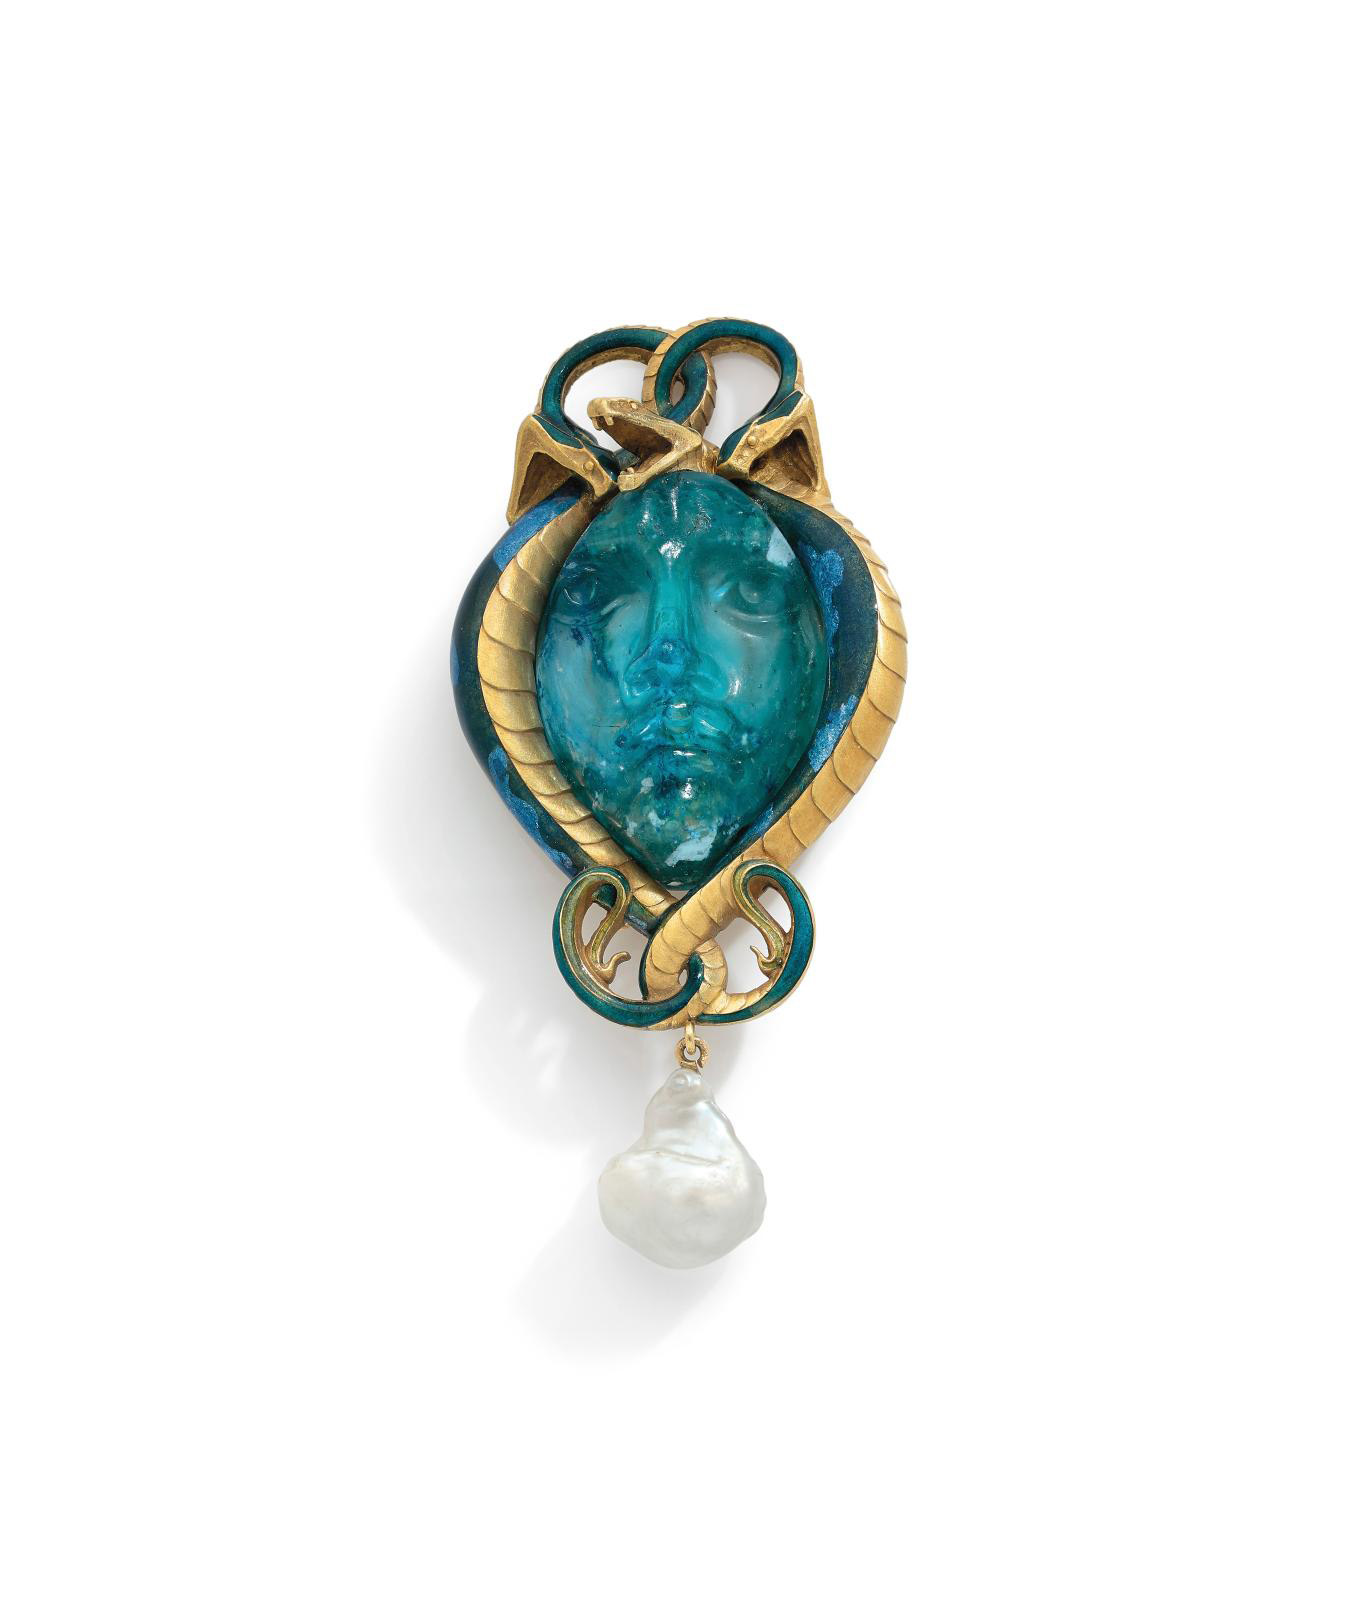 Art Nouveau Jewelry: A Guide to Motifs, Materials and Makers